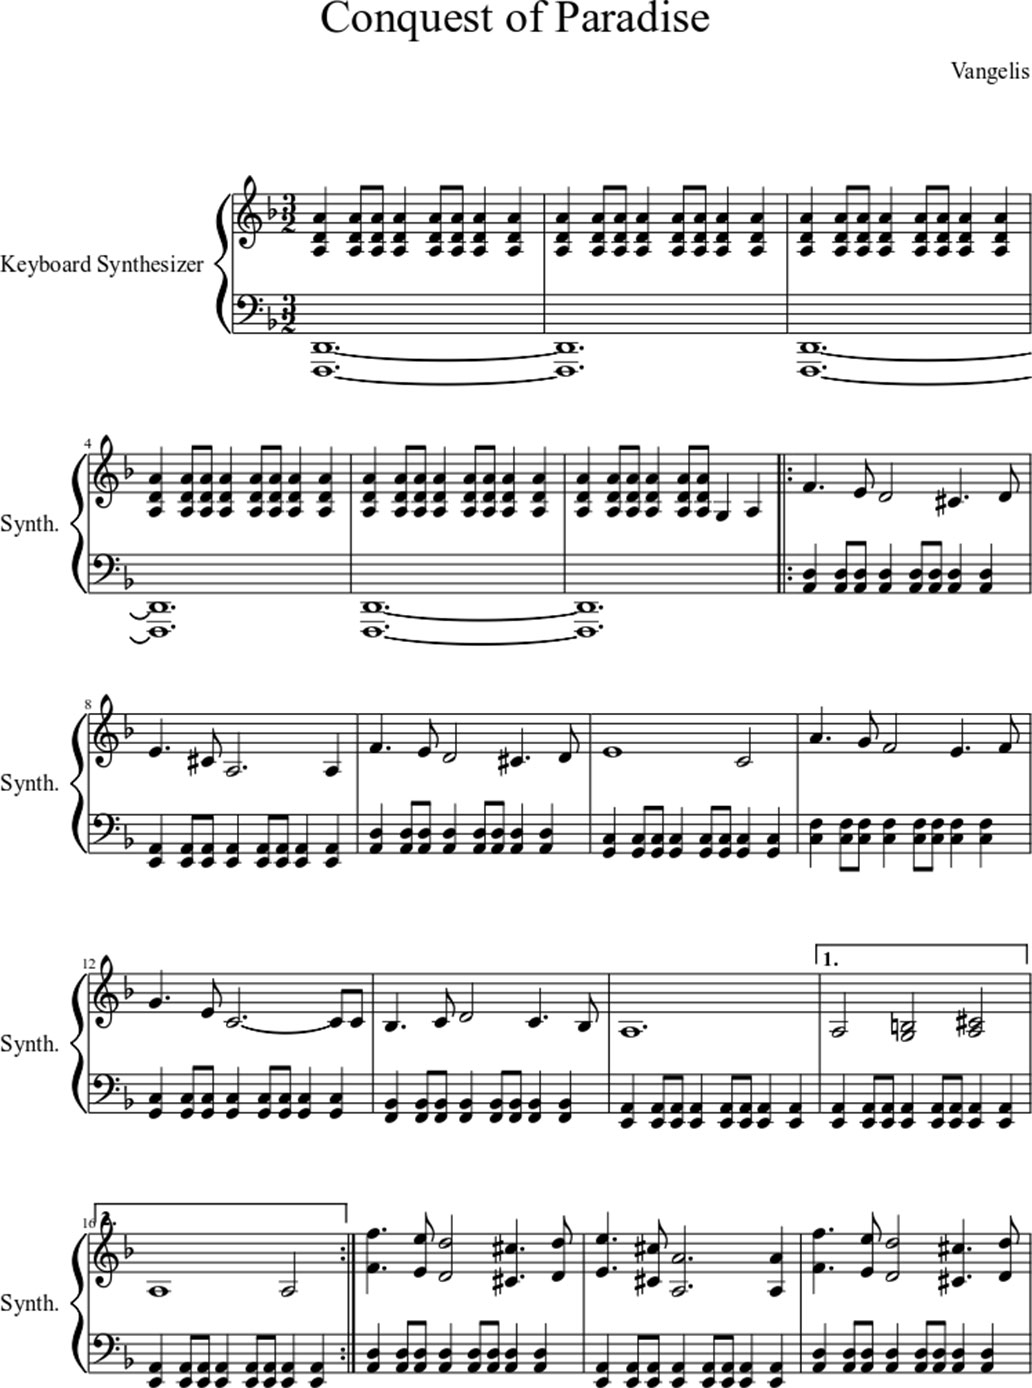 Conquest of Paradise sheet music notes 1